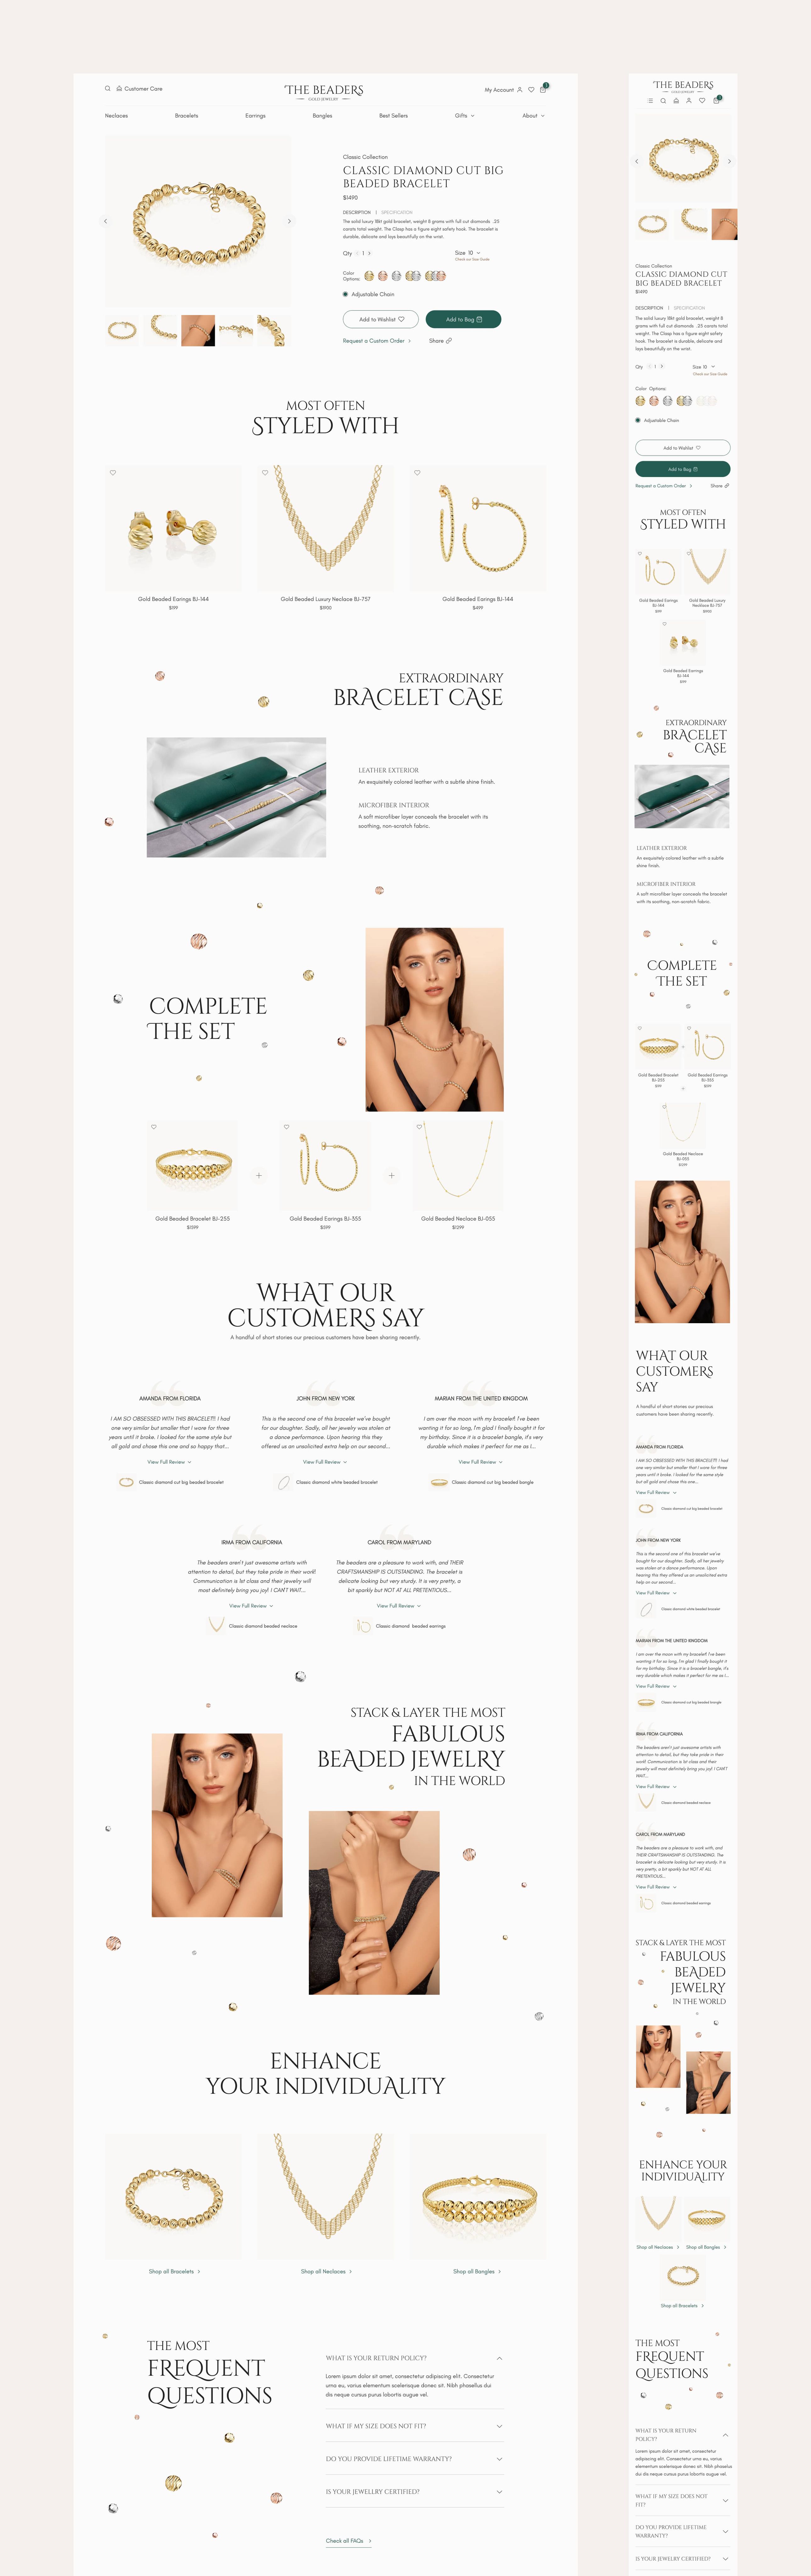 The Beaders product single page: product banner with product stock information and product description..etc, product related product categories, section devoted to luxury product box and related to product customers' testimonials, related product categorization, frequent purchase & shipping questions